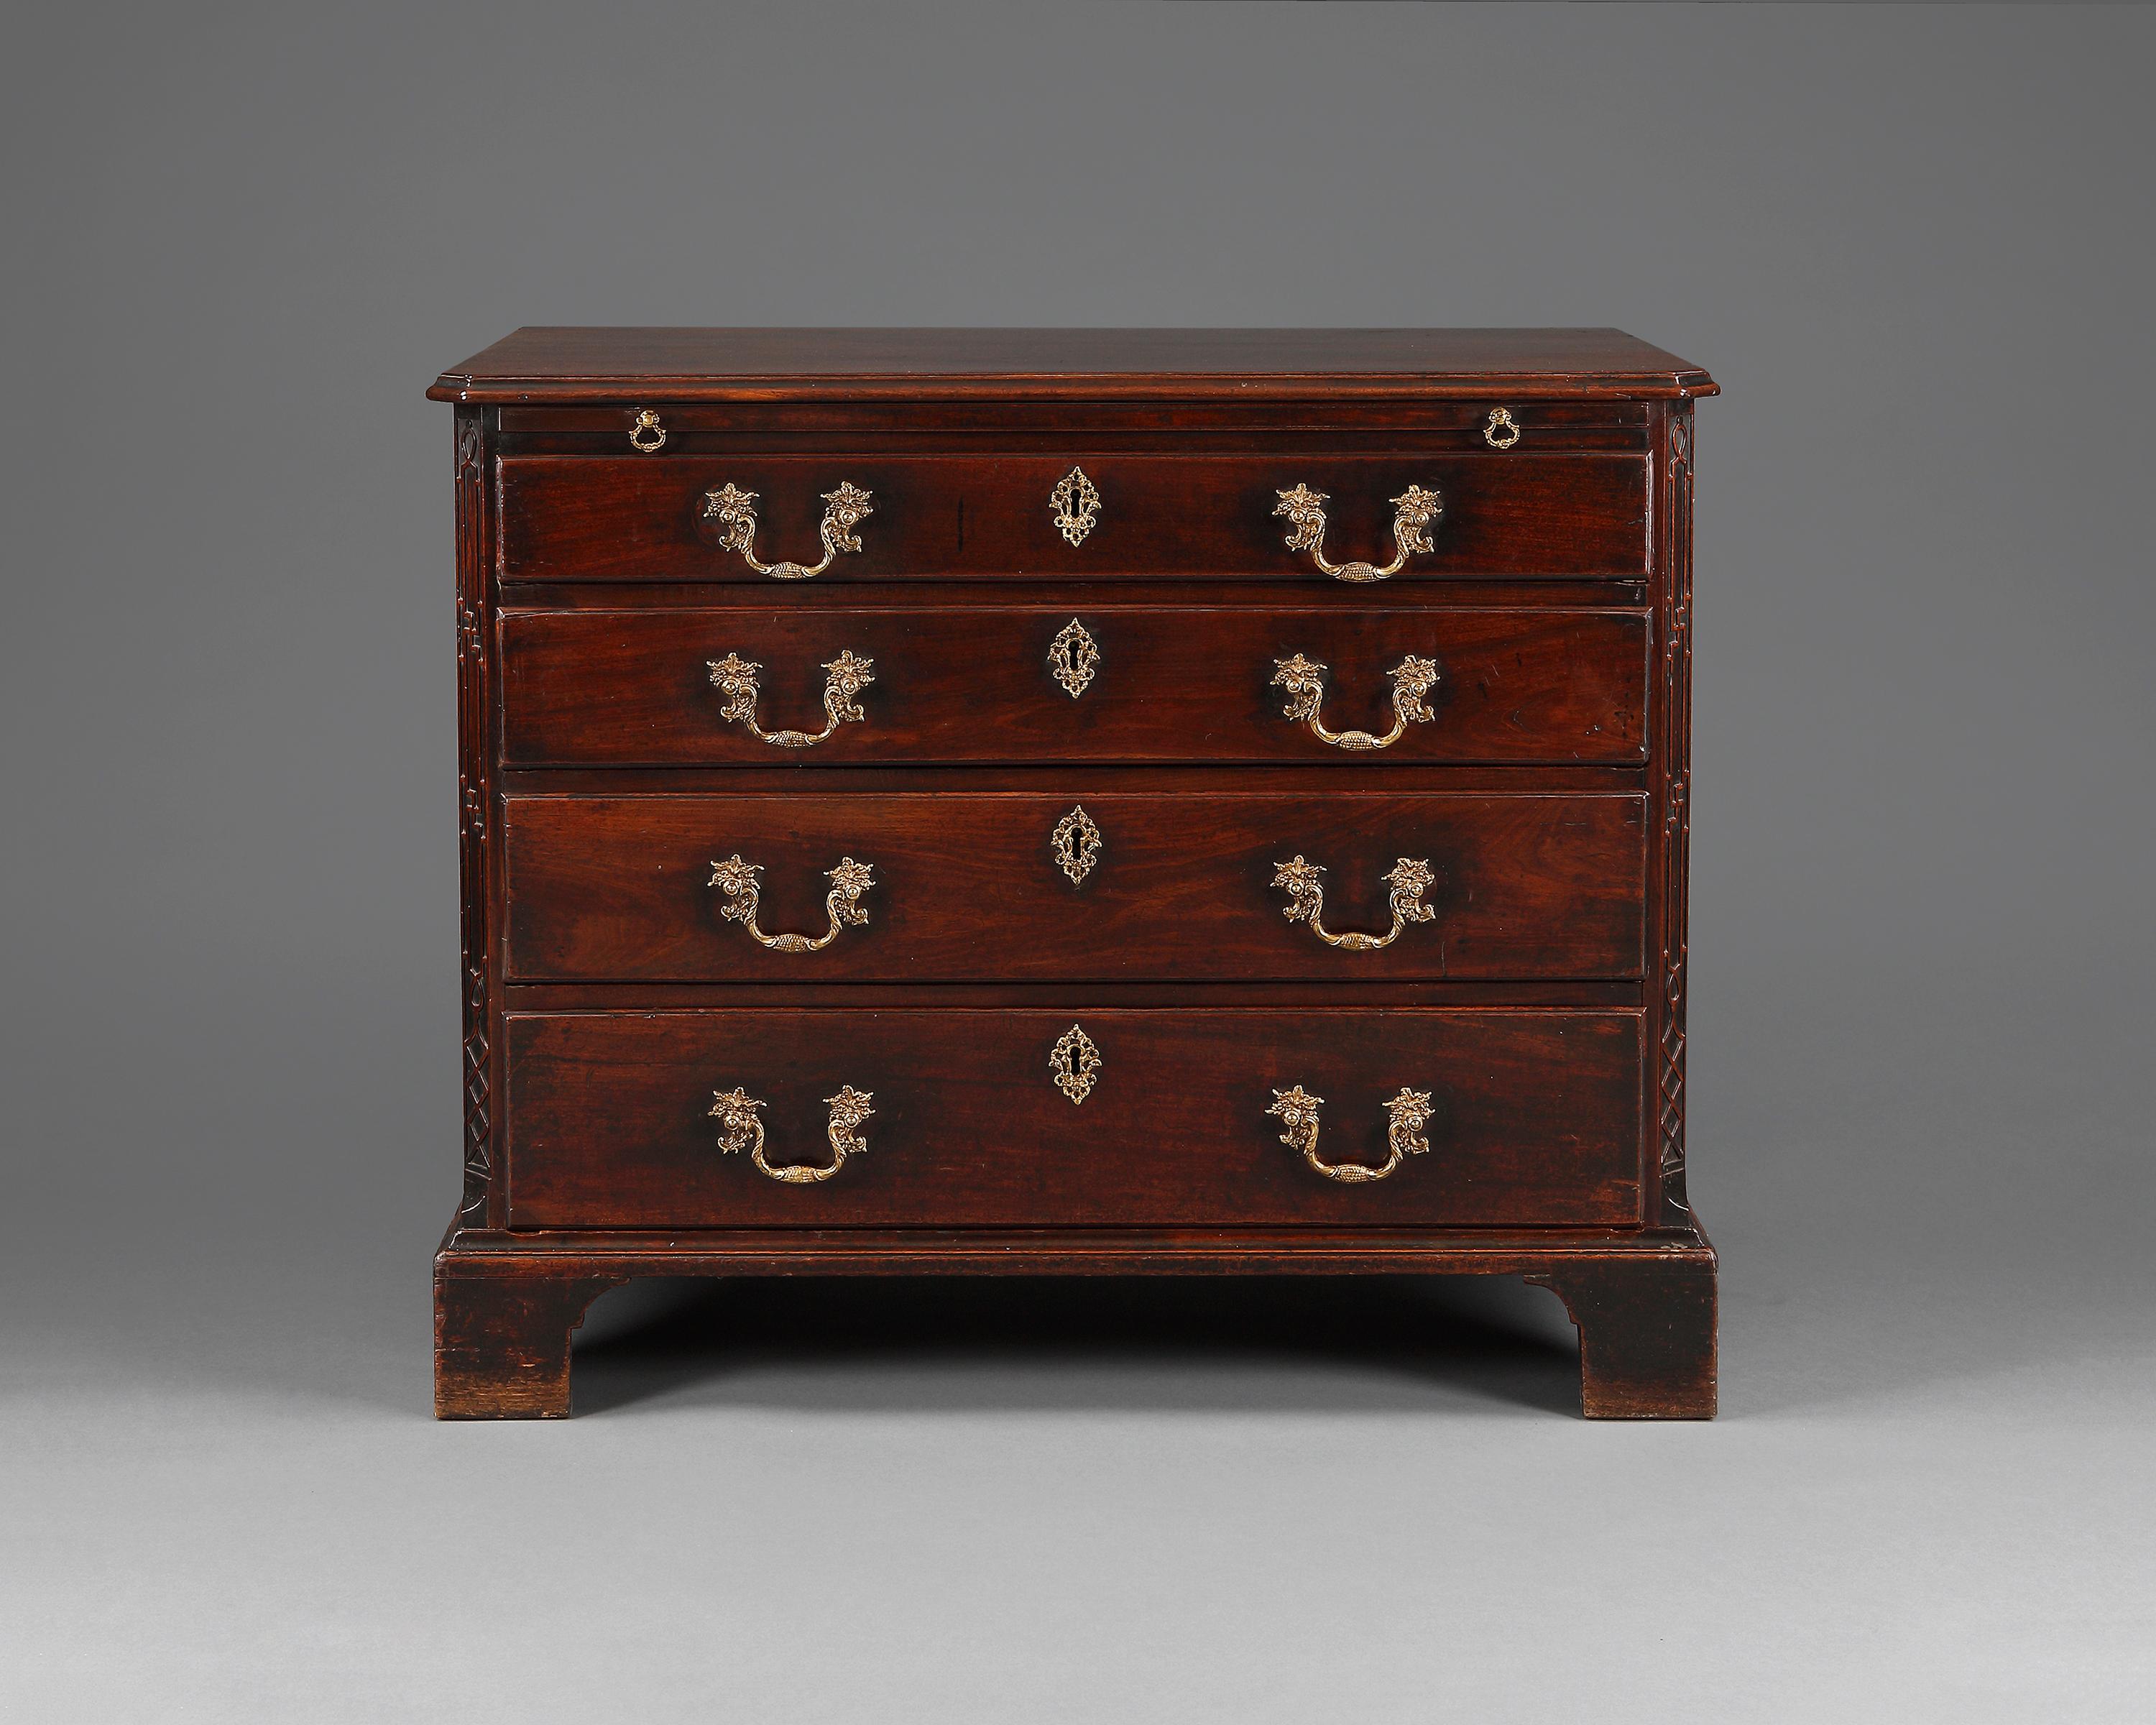 A fine Chippendale period mahogany chest of drawers. The rectangular moulded top above a brushing slide with four long graduated oak lined drawers below. The cantered ends having blind fret-work decoration. The whole is raised on the original